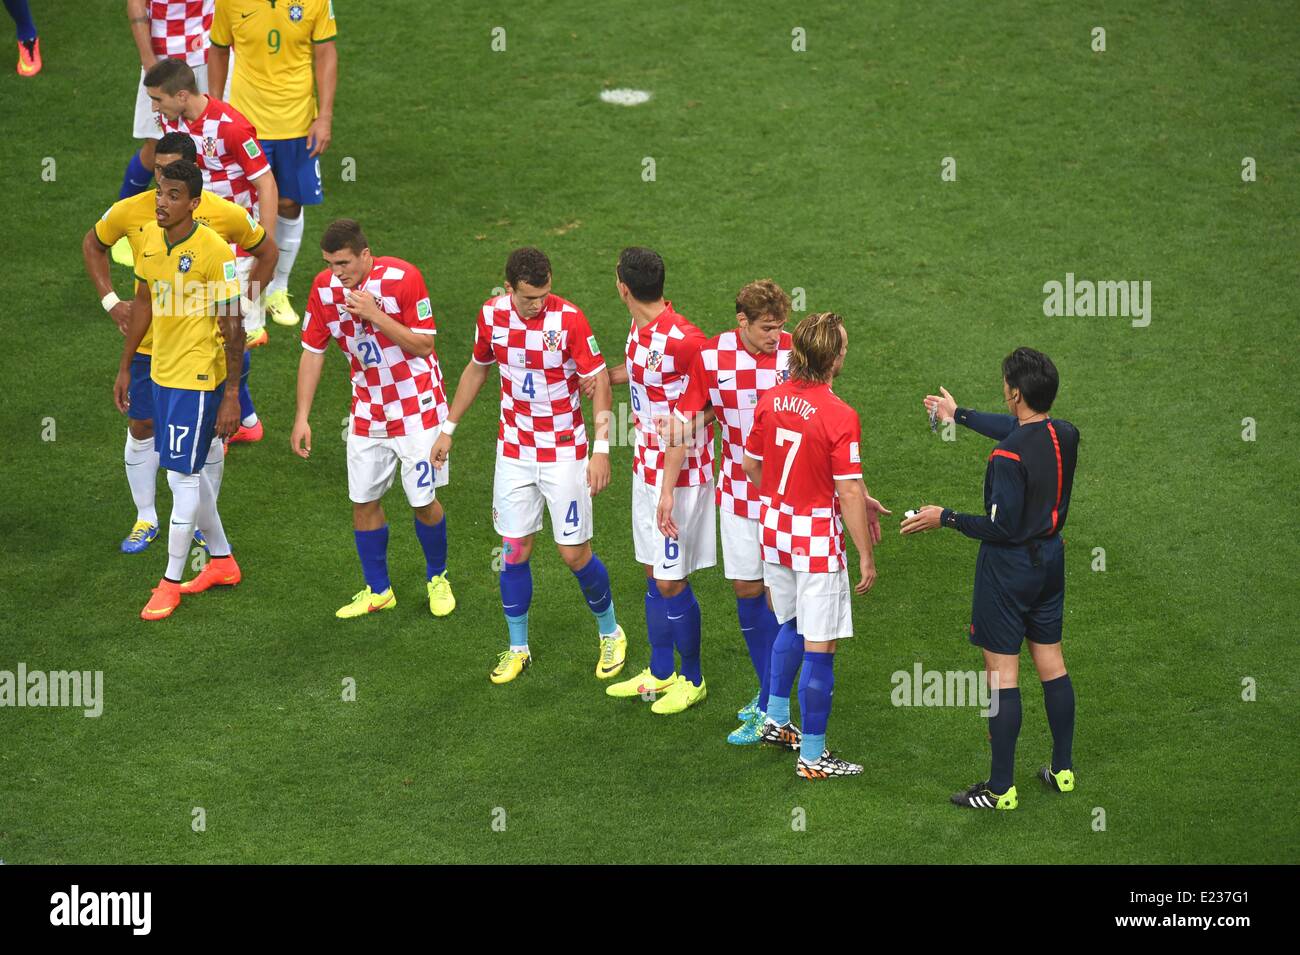 Sao Paulo, Brazil. 12th June, 2014. Croatia team group (CRO), Yuichi Nishimura (Referee) Football/Soccer : Referee Yuichi Nishimura gives instructions to Croatia players as they form a wall during the FIFA World Cup Brazil 2014 Group A match between Brazil 3-1 Croatia at Arena de Sao Paulo in Sao Paulo, Brazil . © FAR EAST PRESS/AFLO/Alamy Live News Stock Photo